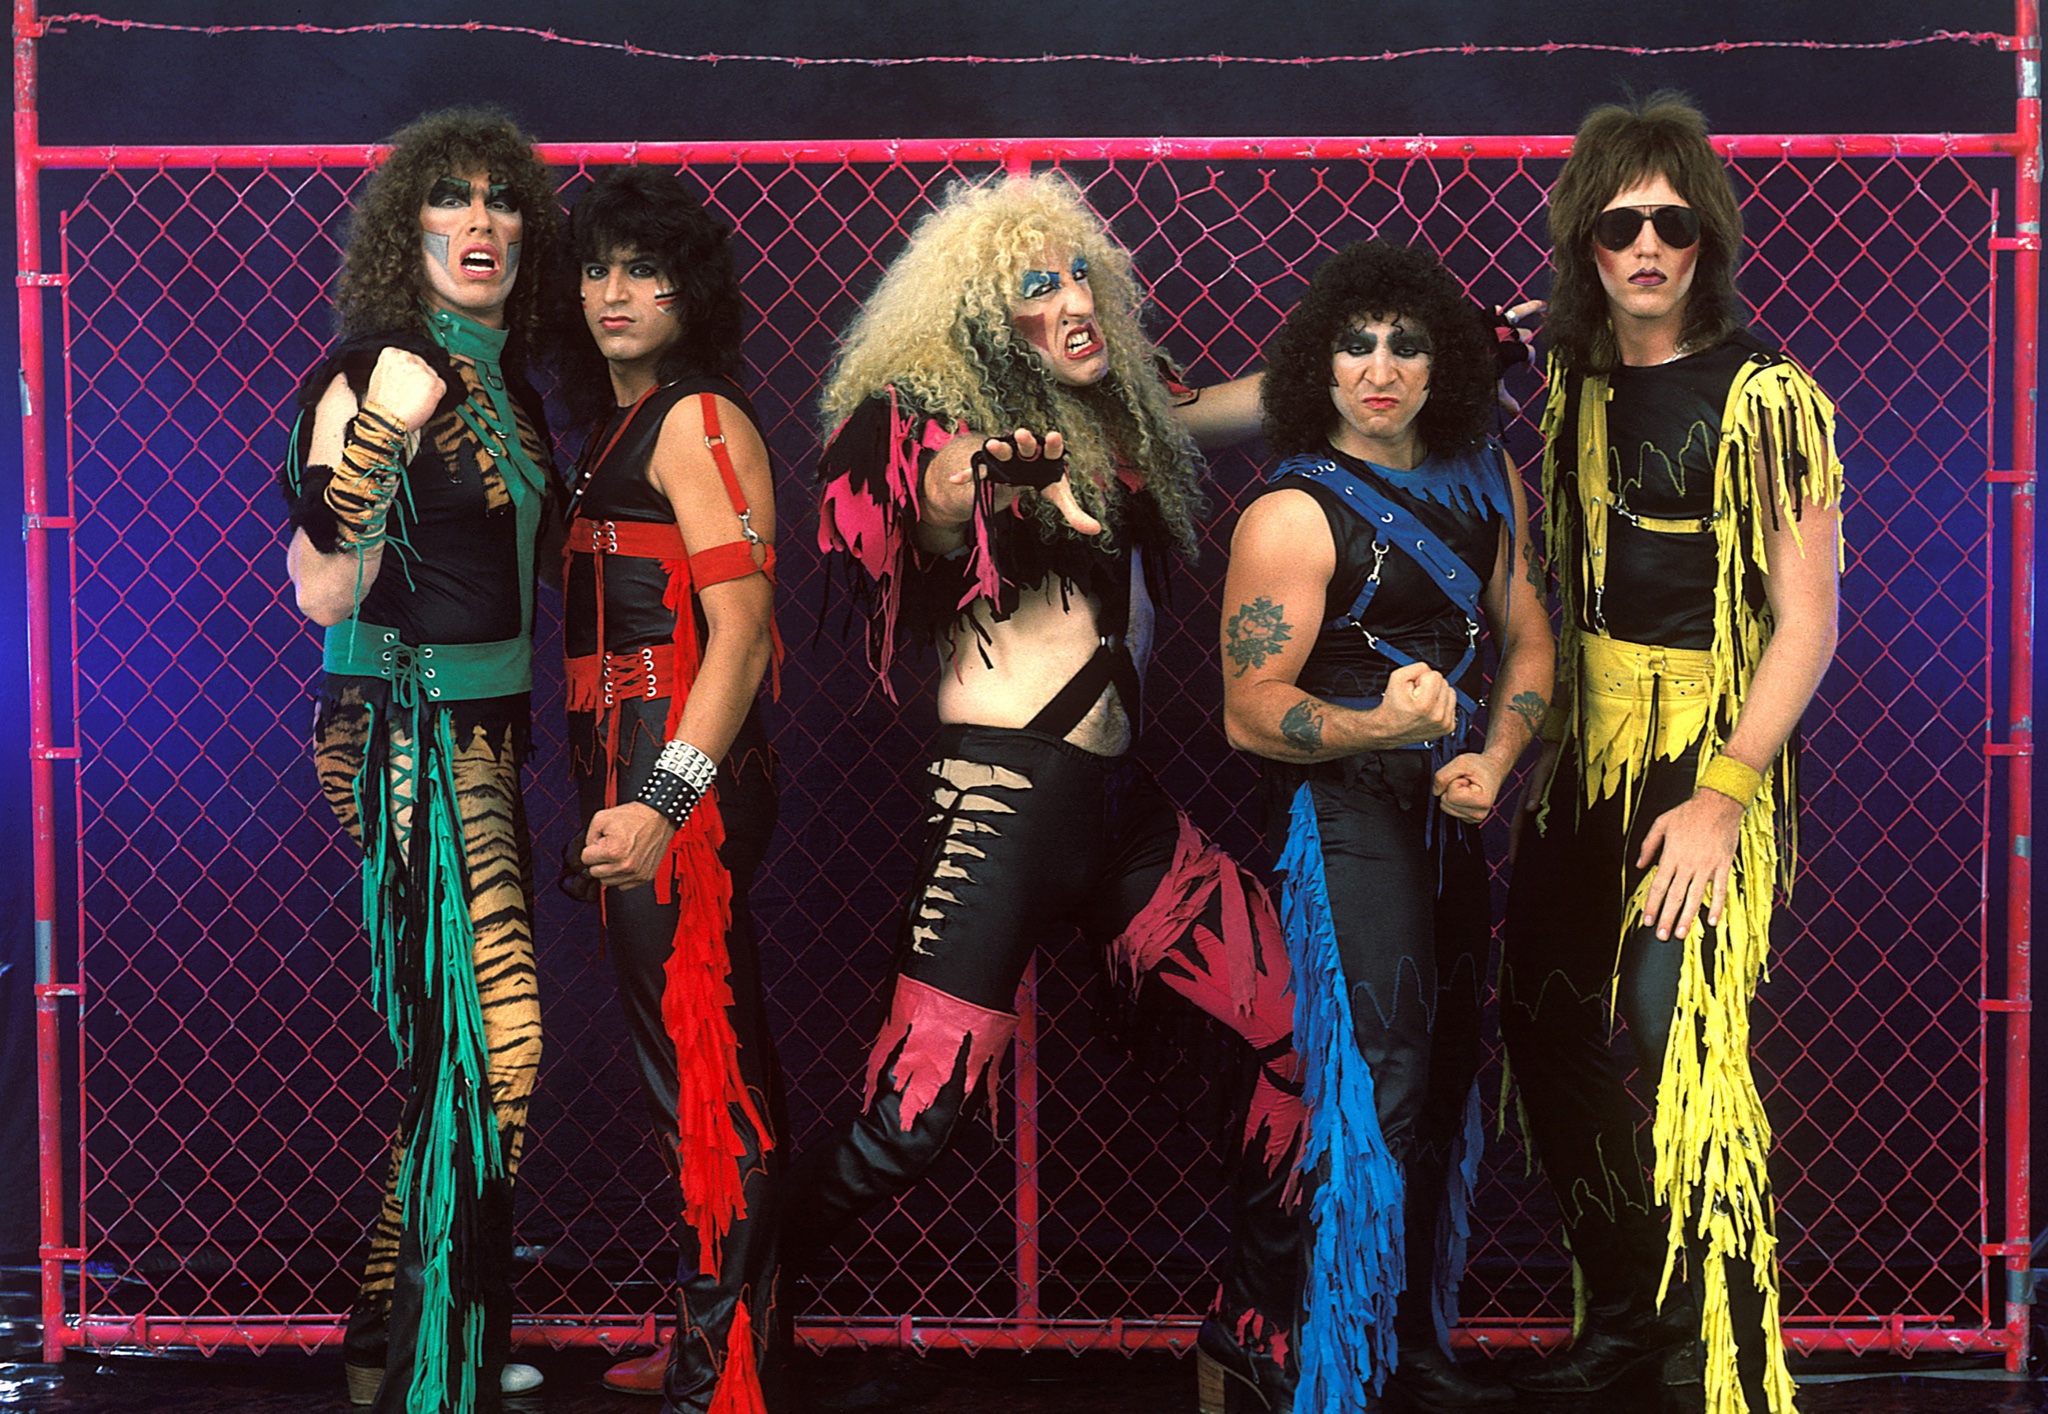 WHERE NOT GONNA TAKE IT
NO
WERE
NOT
GONNA
TAKE
IT
ANYMORE
WERE 
NOT
GONNA 
TAKE
IT
HAPPY BIRTHDAY DEE SNIDER 